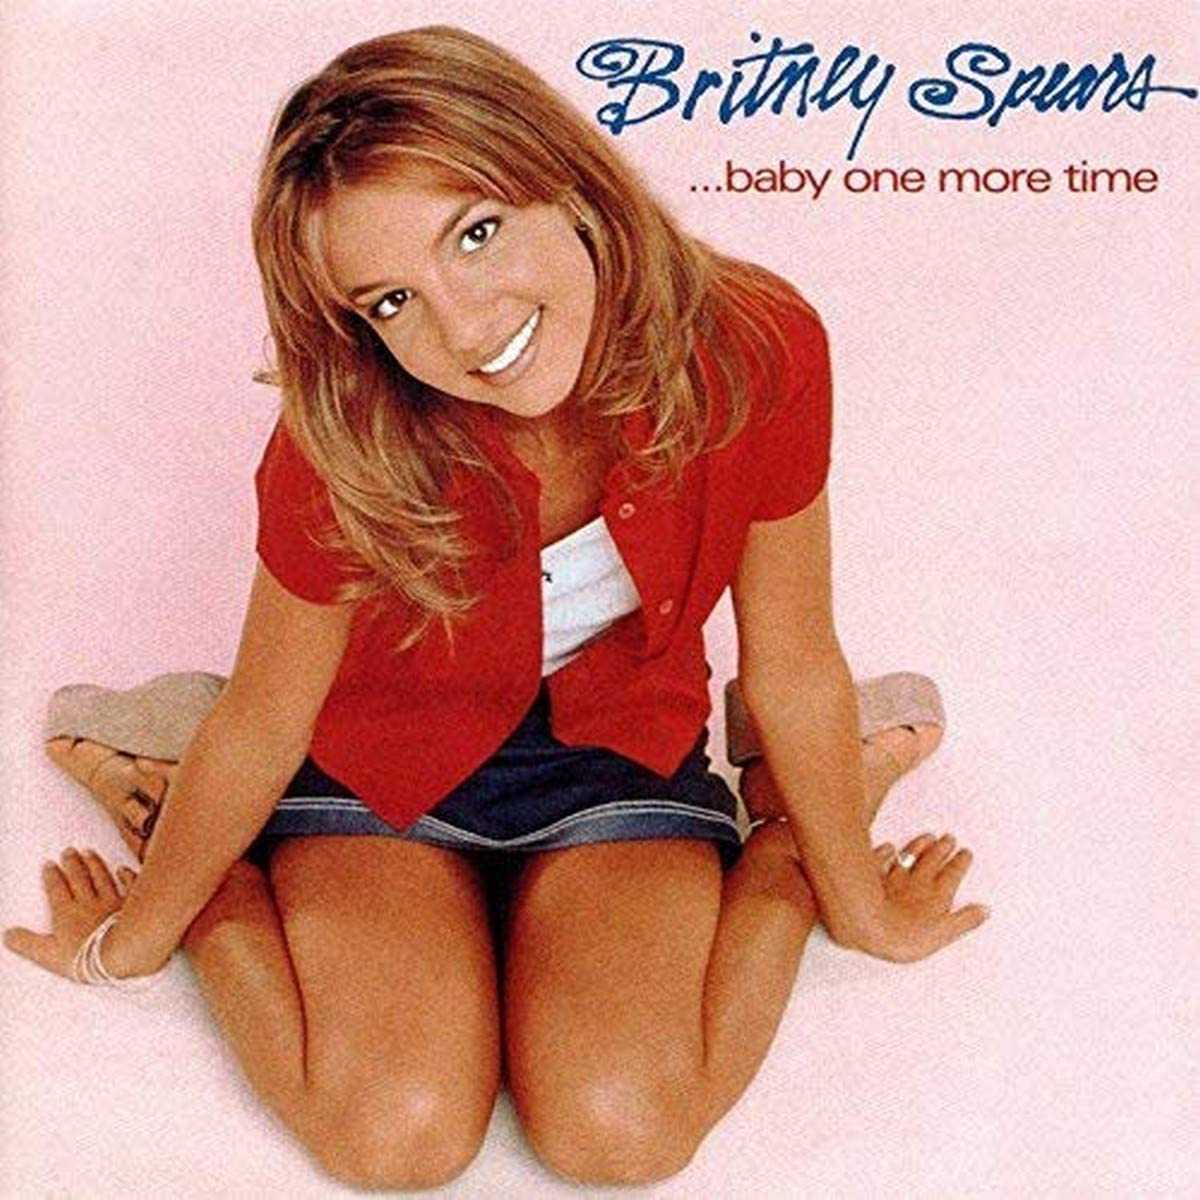 baby one more time testo britney spears